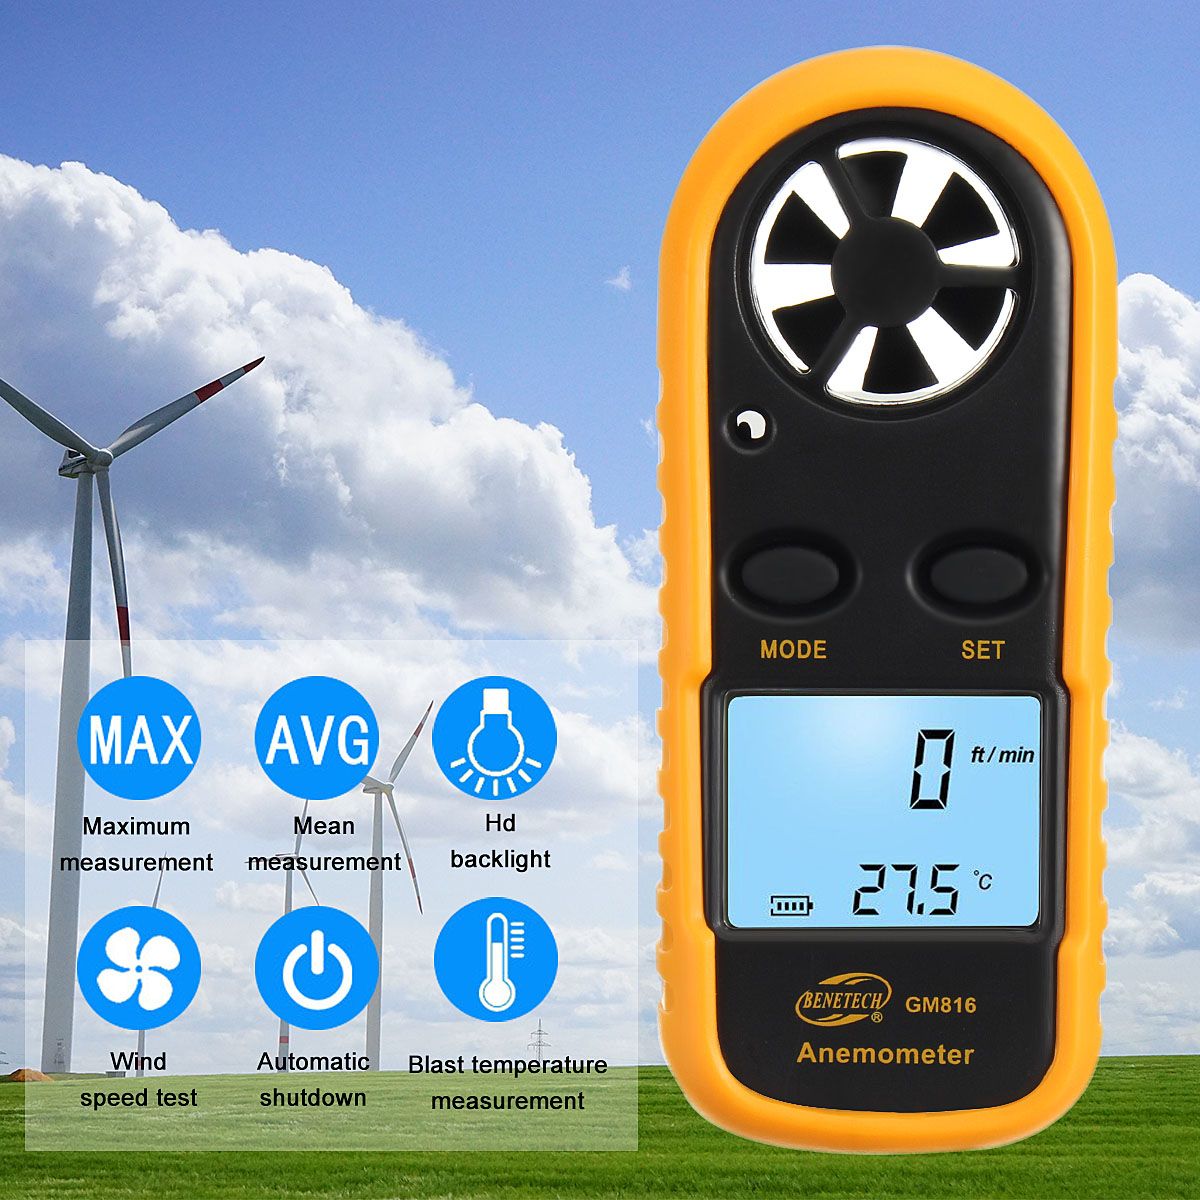 Digital-LCD-Anemometer-Thermometer-Air-Wind-Speed-Meter-Temperature-Tester-1277544